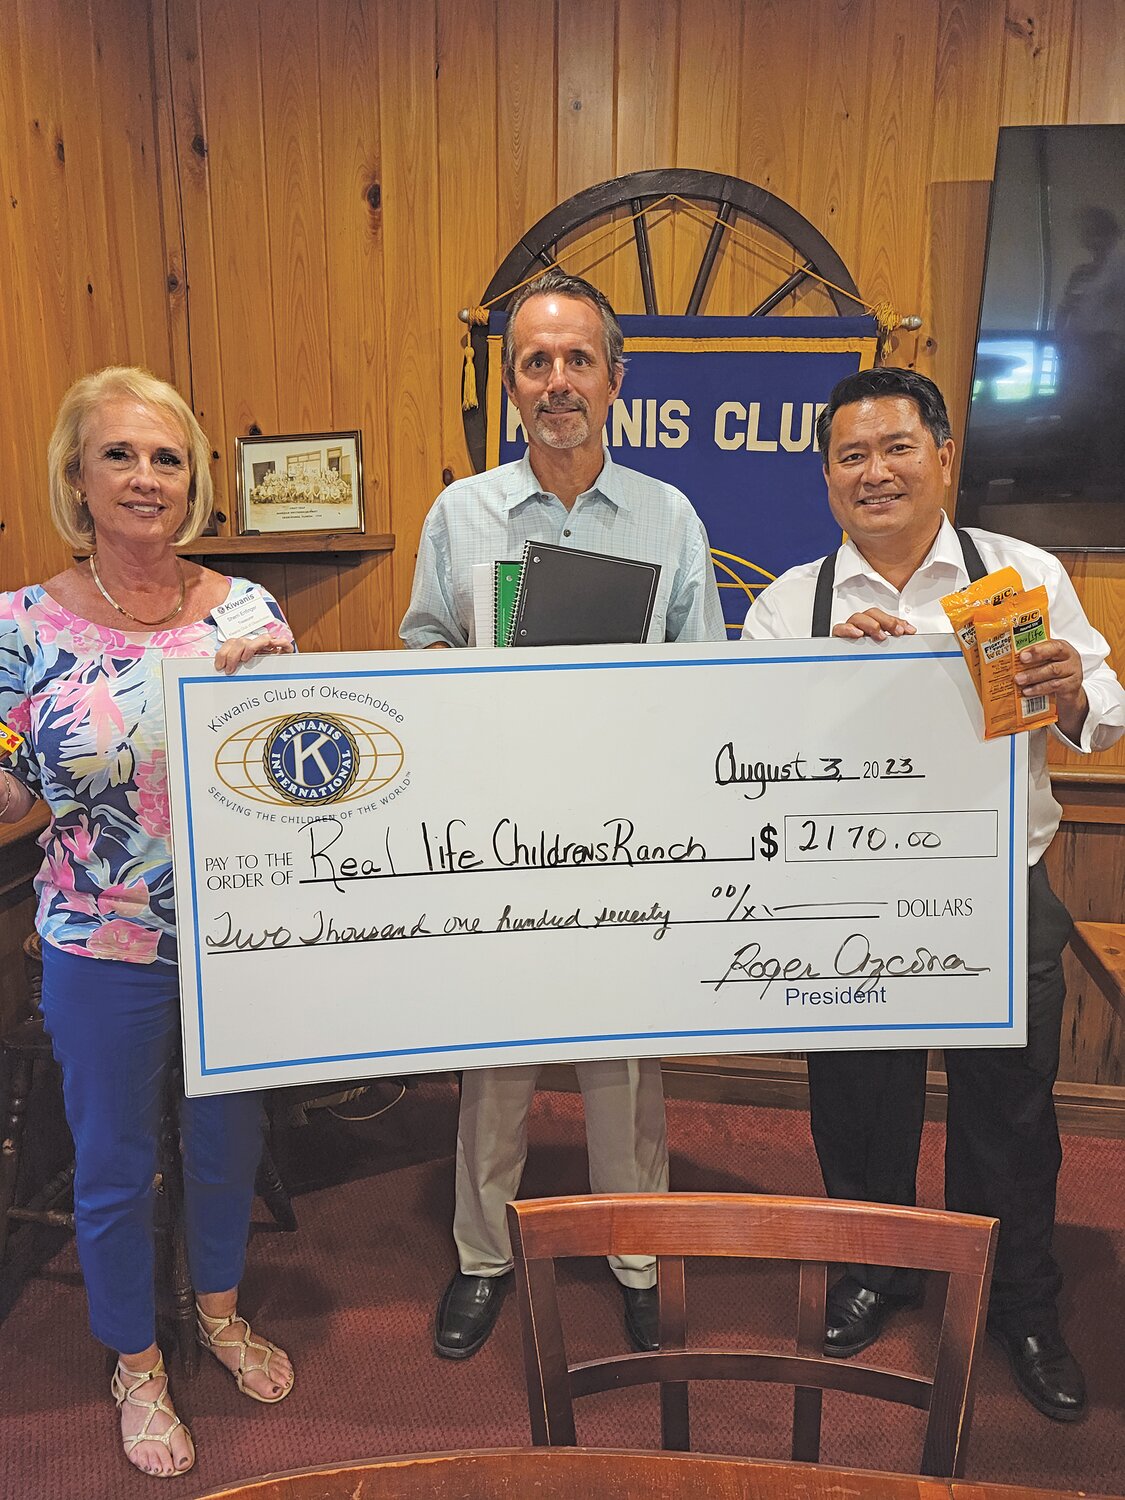 Pictured from left to right are Kiwanis member Sherri Enfinger, RLCR Executive Director Mark Mayers and Kiwanis President Roger Azcona.